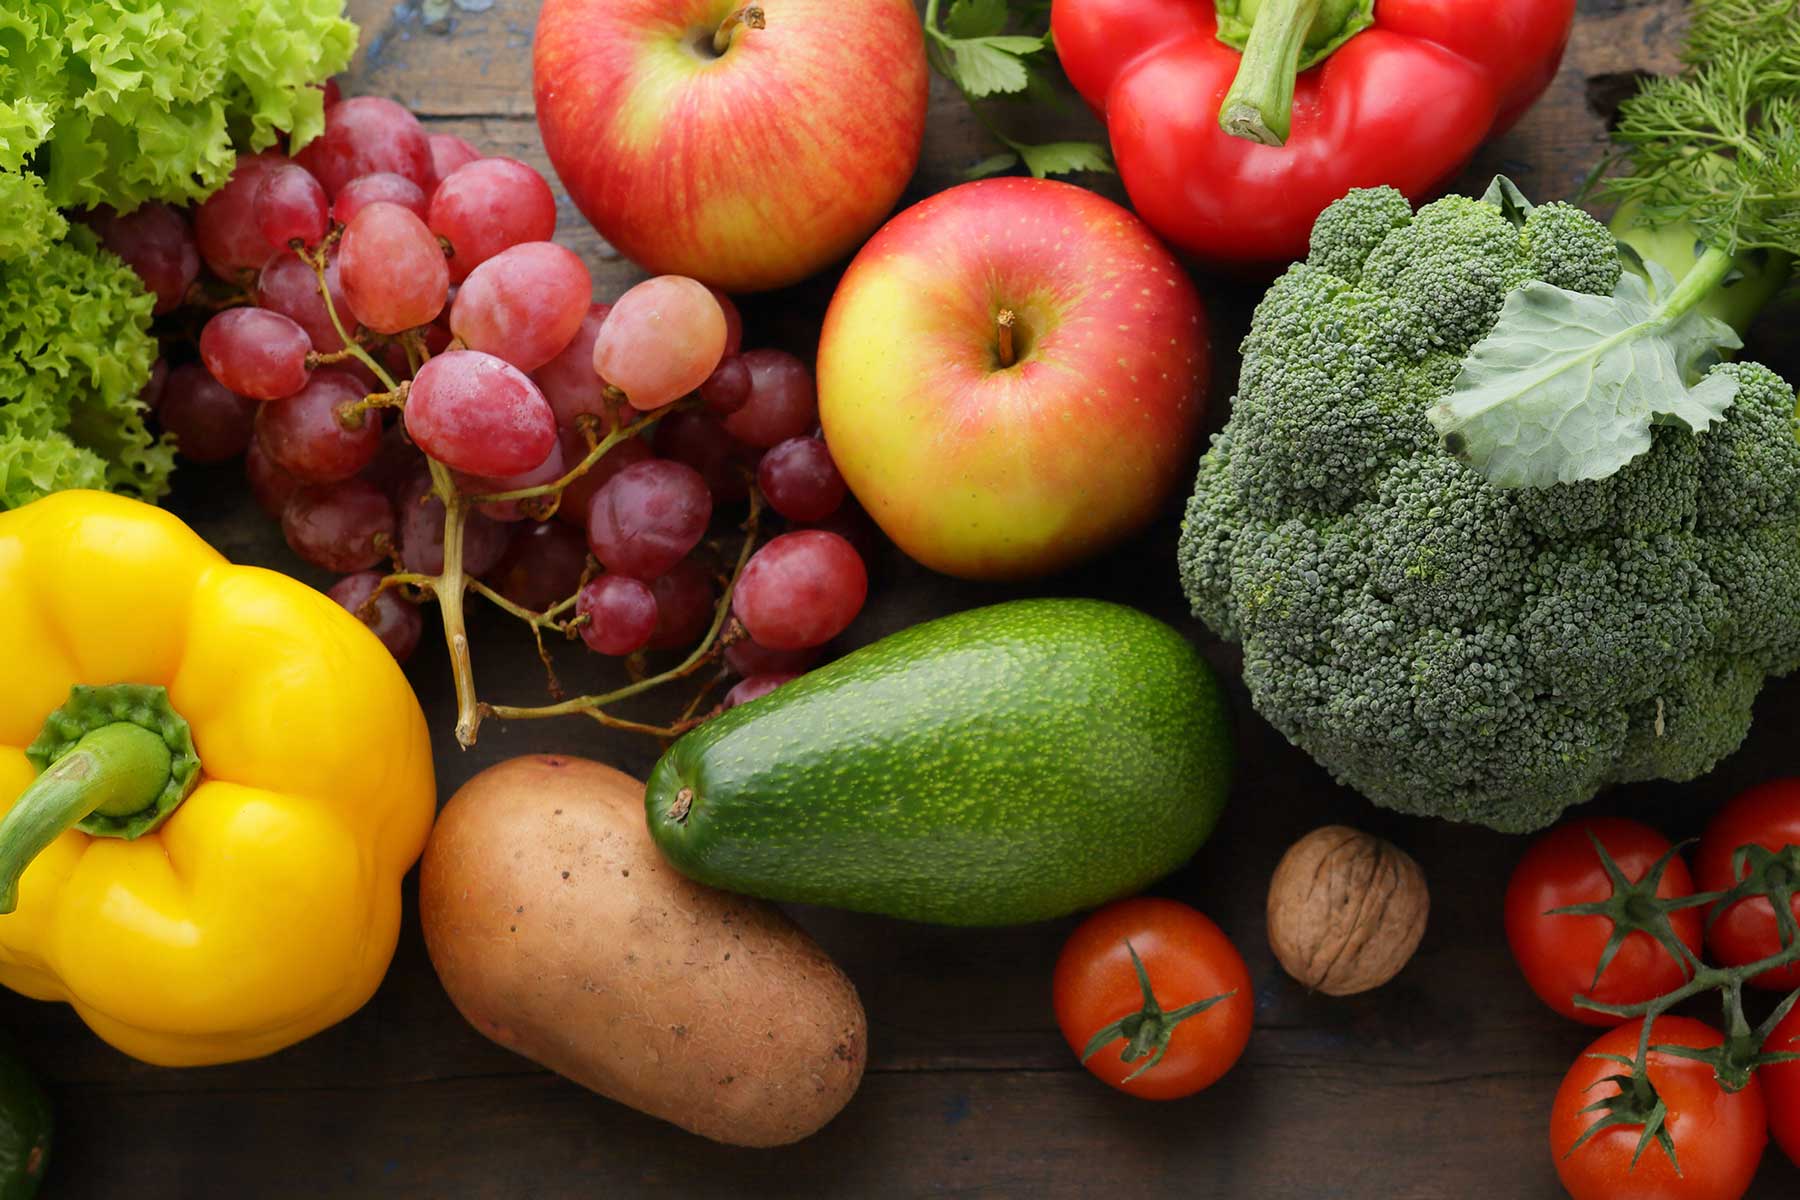 Fruit and veggies rich in potassium may be key to lowering blood pressure -  USC Today